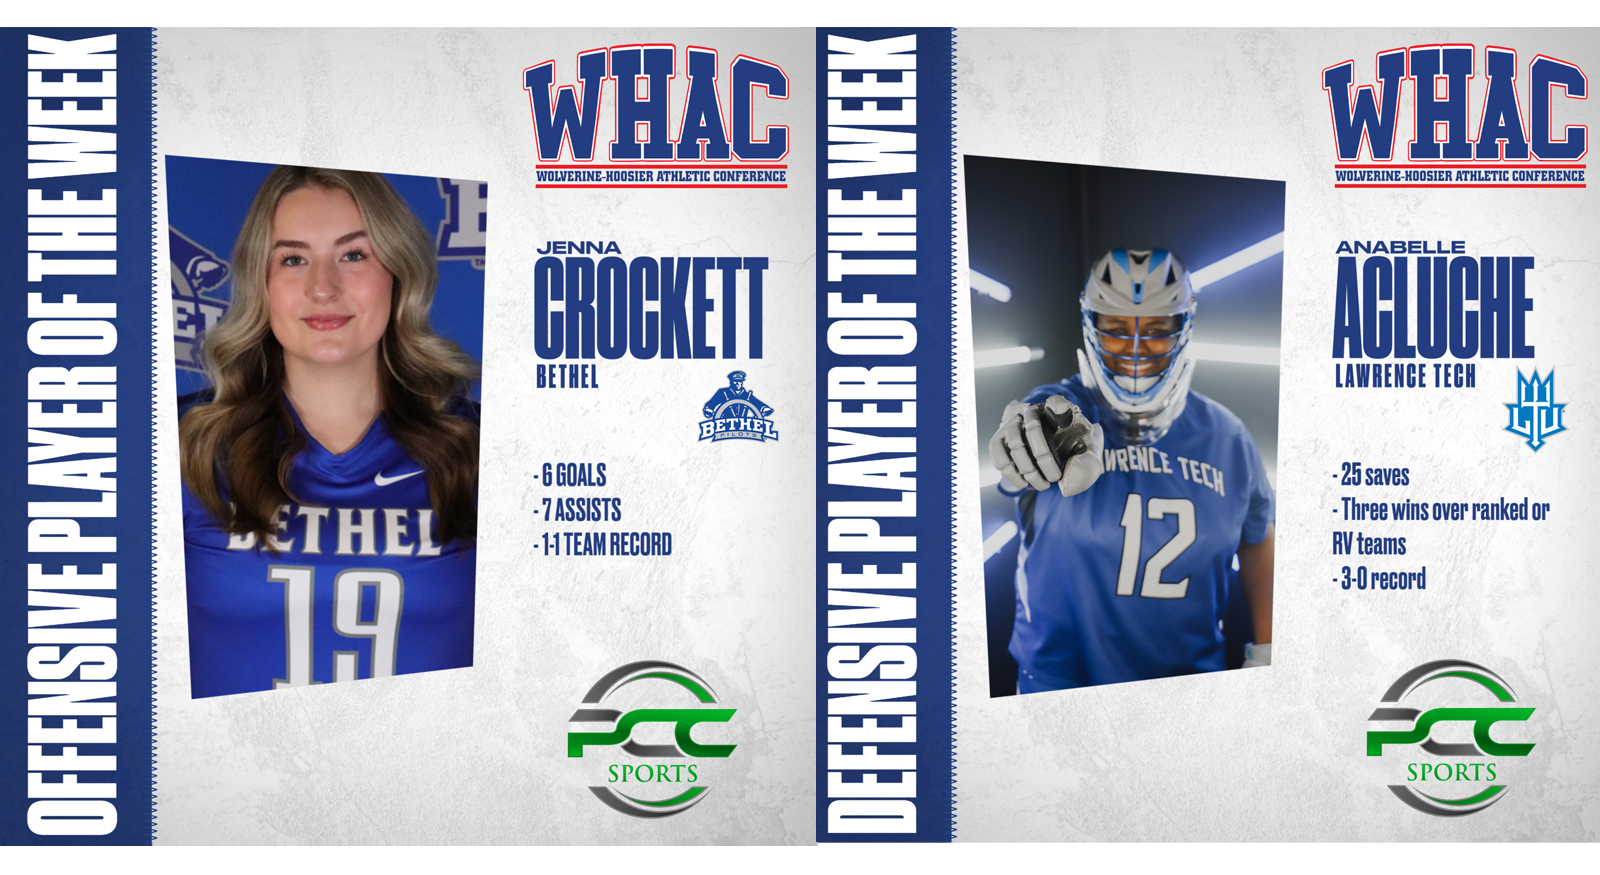 Crockett and Acluche win Player of the Week